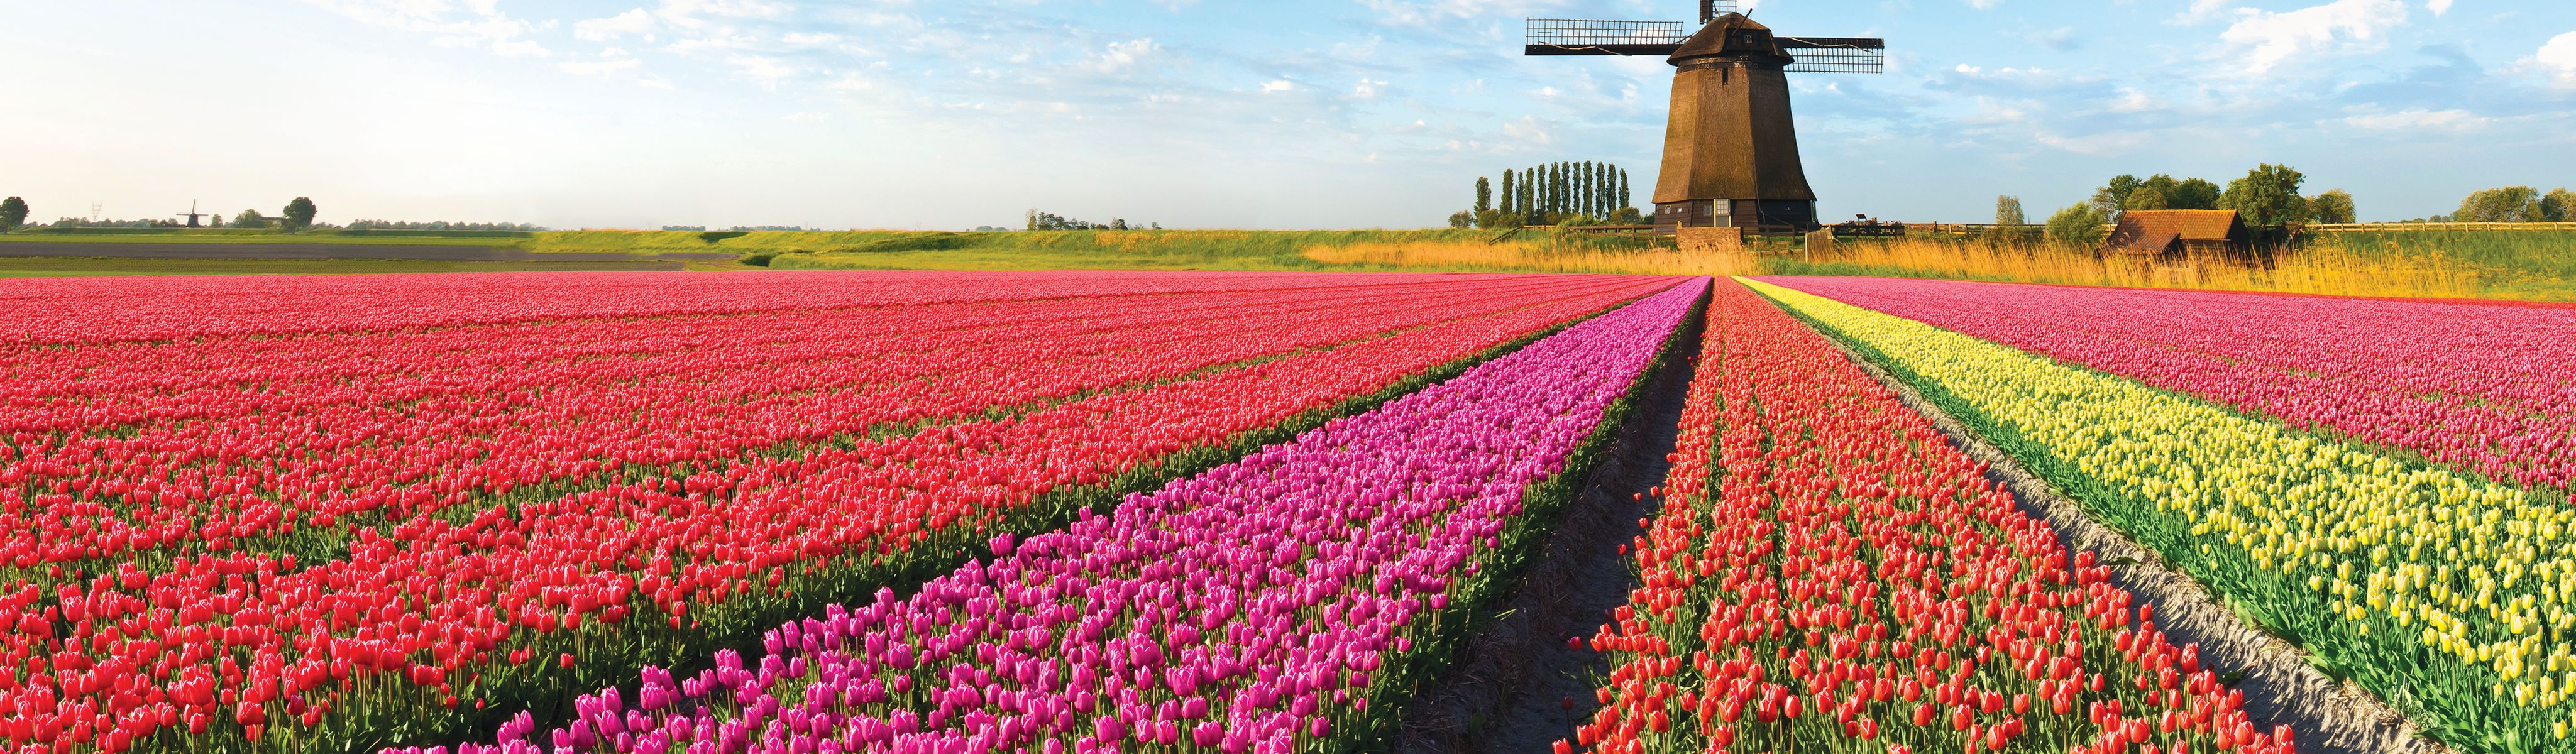 Guided Tours of The Netherlands | EF Go Ahead Tours